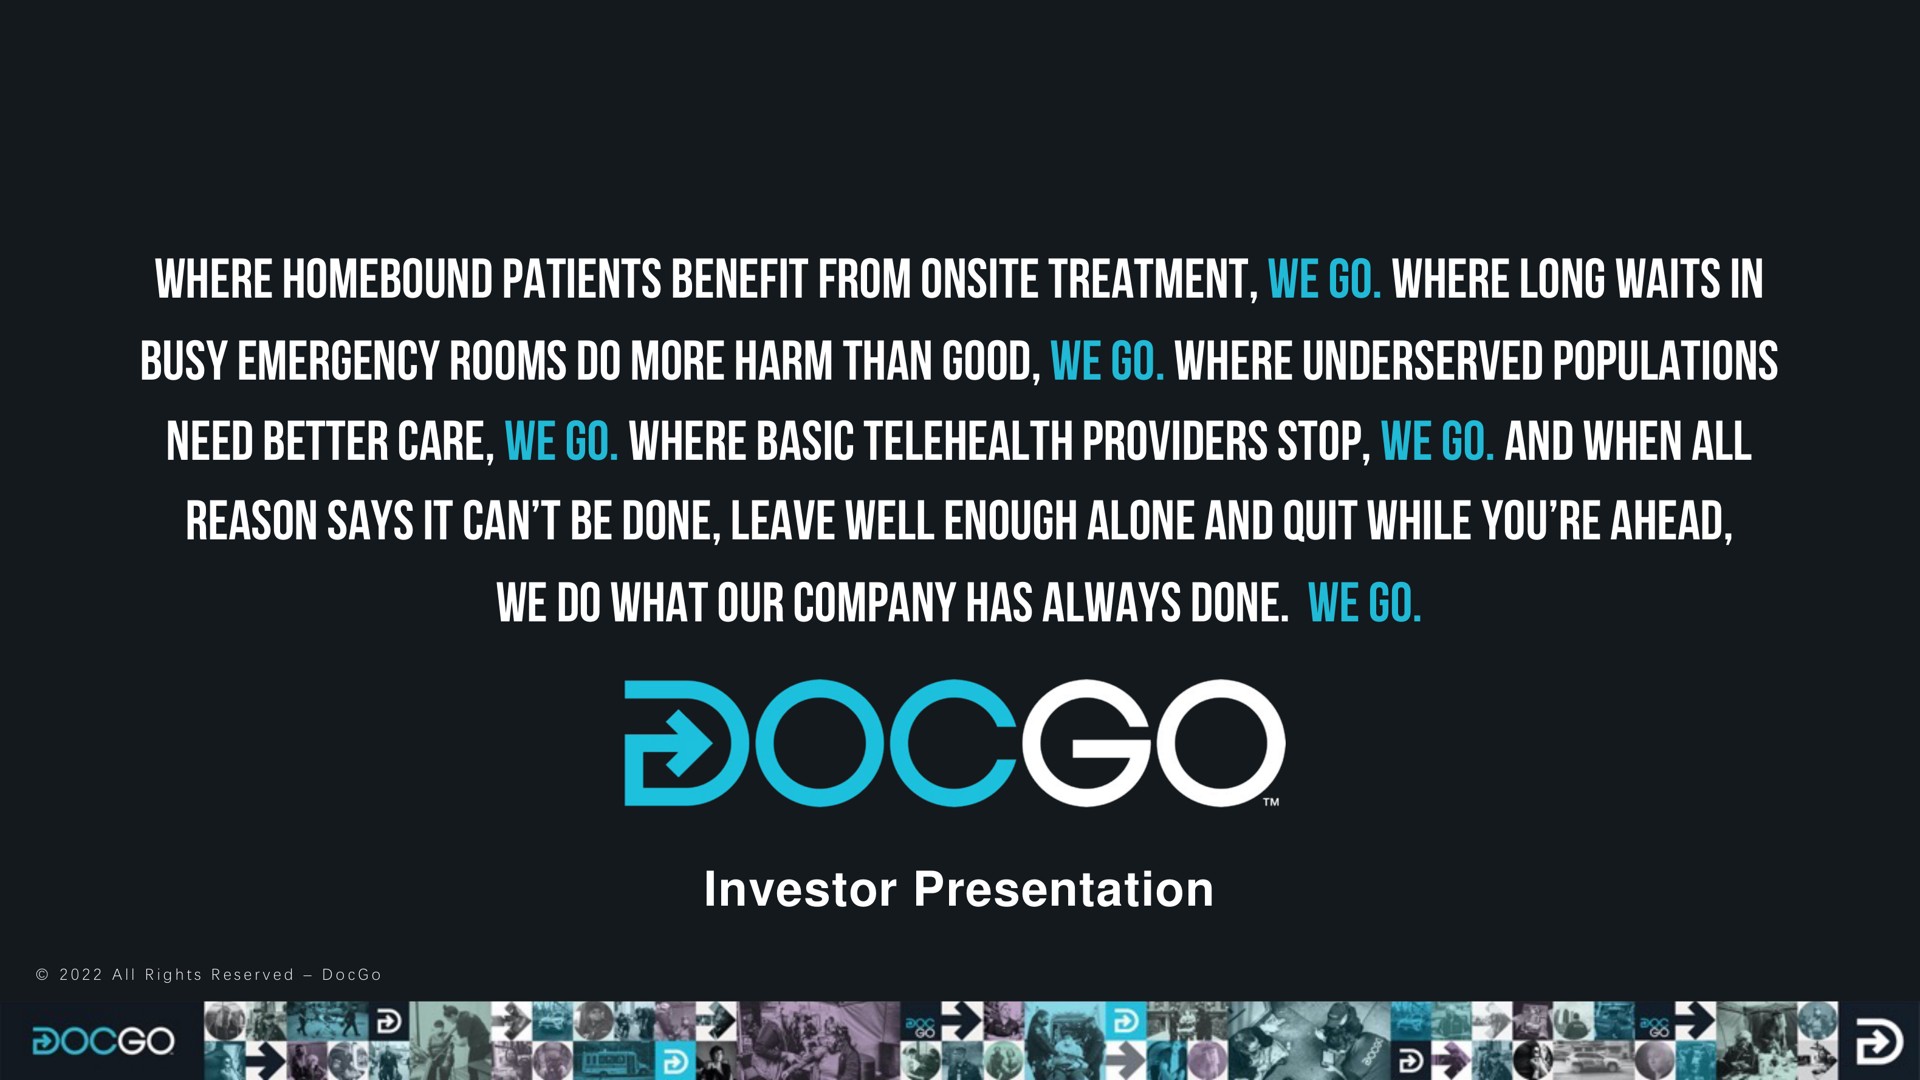 where homebound patients benefit from treatment we go where long waits in busy emergency rooms do more harm than good we go where populations need better care we go where basic providers stop we go and when all reason says it can be done leave well enough alone and quit while you ahead we do what our company has always done we go investor presentation | DocGo